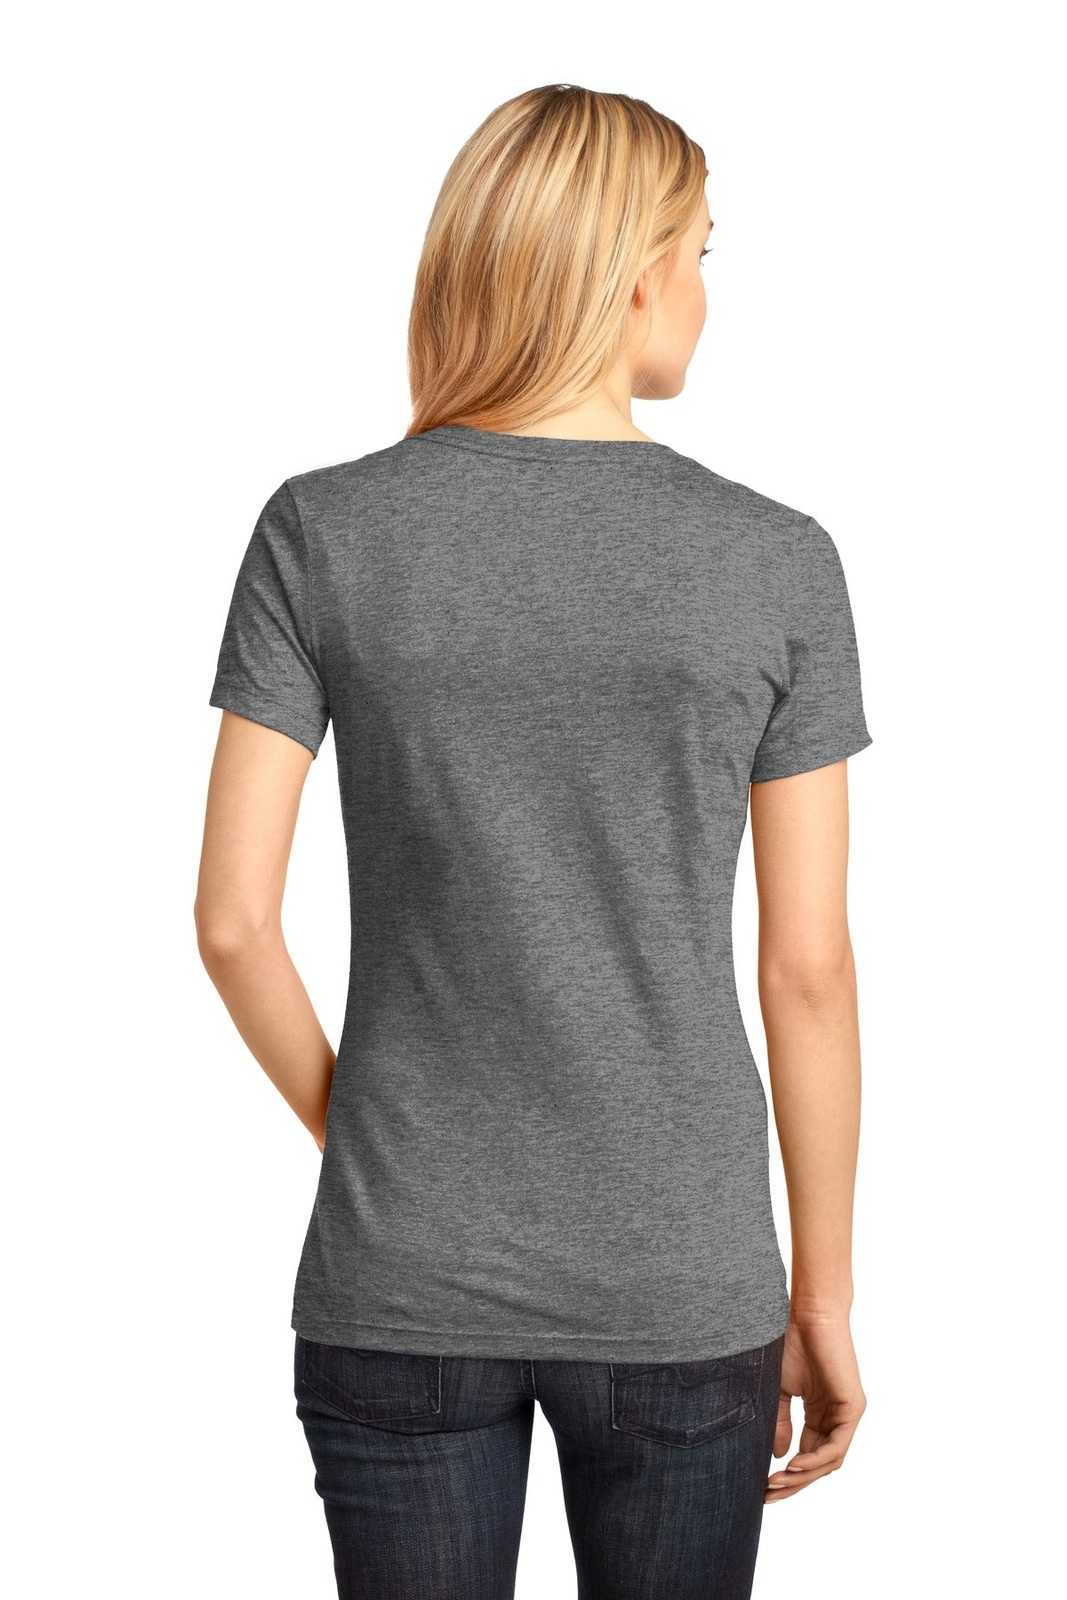 District DM1170L Women's Perfect Weight V-Neck Tee - Heathered Nickel - HIT a Double - 1